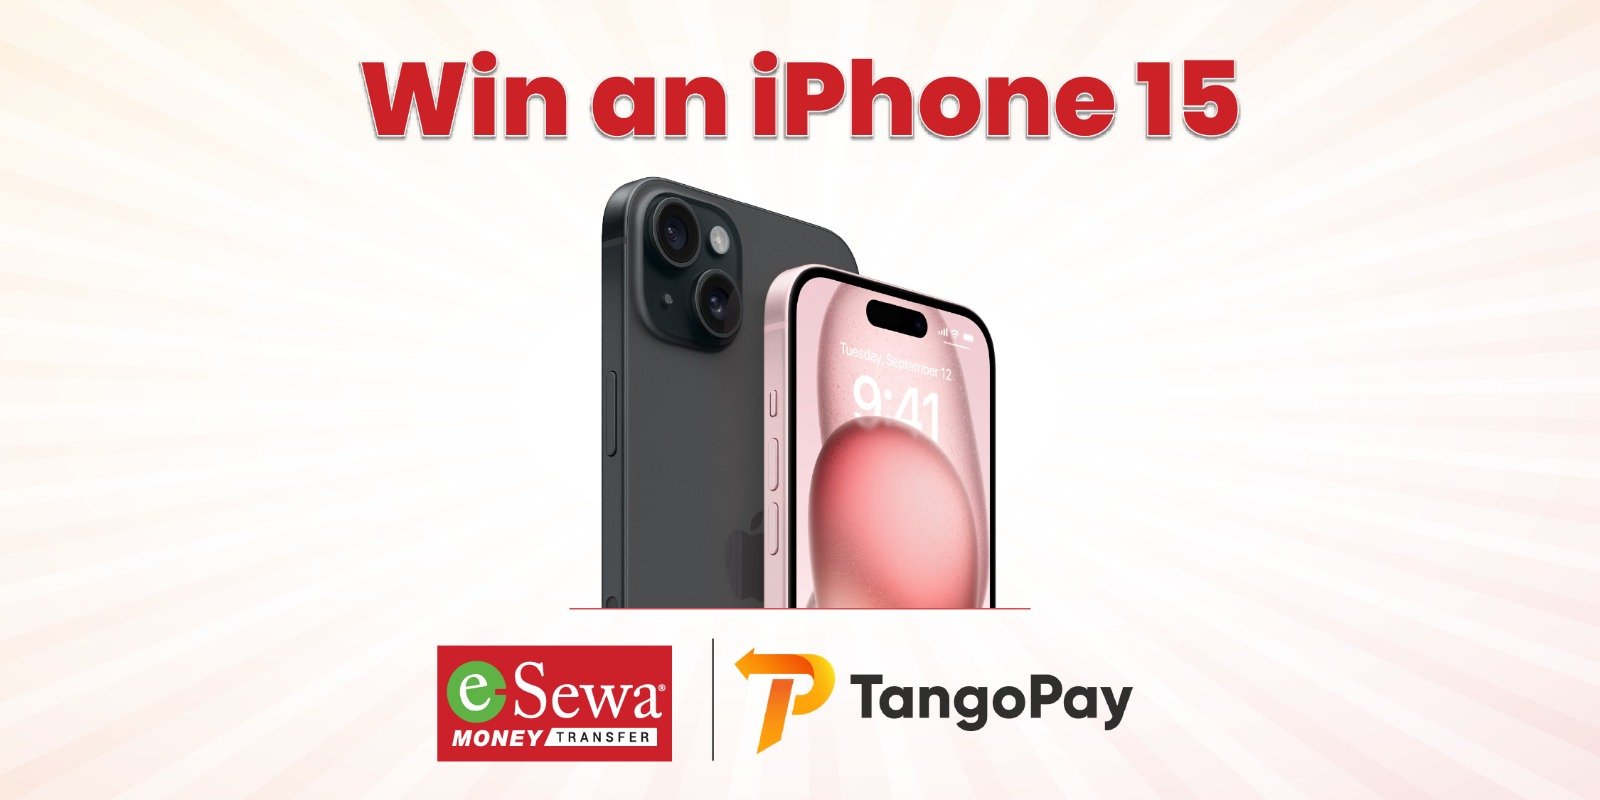 Chance to win iPhone 15 by Sending Money from UK via TangoPay